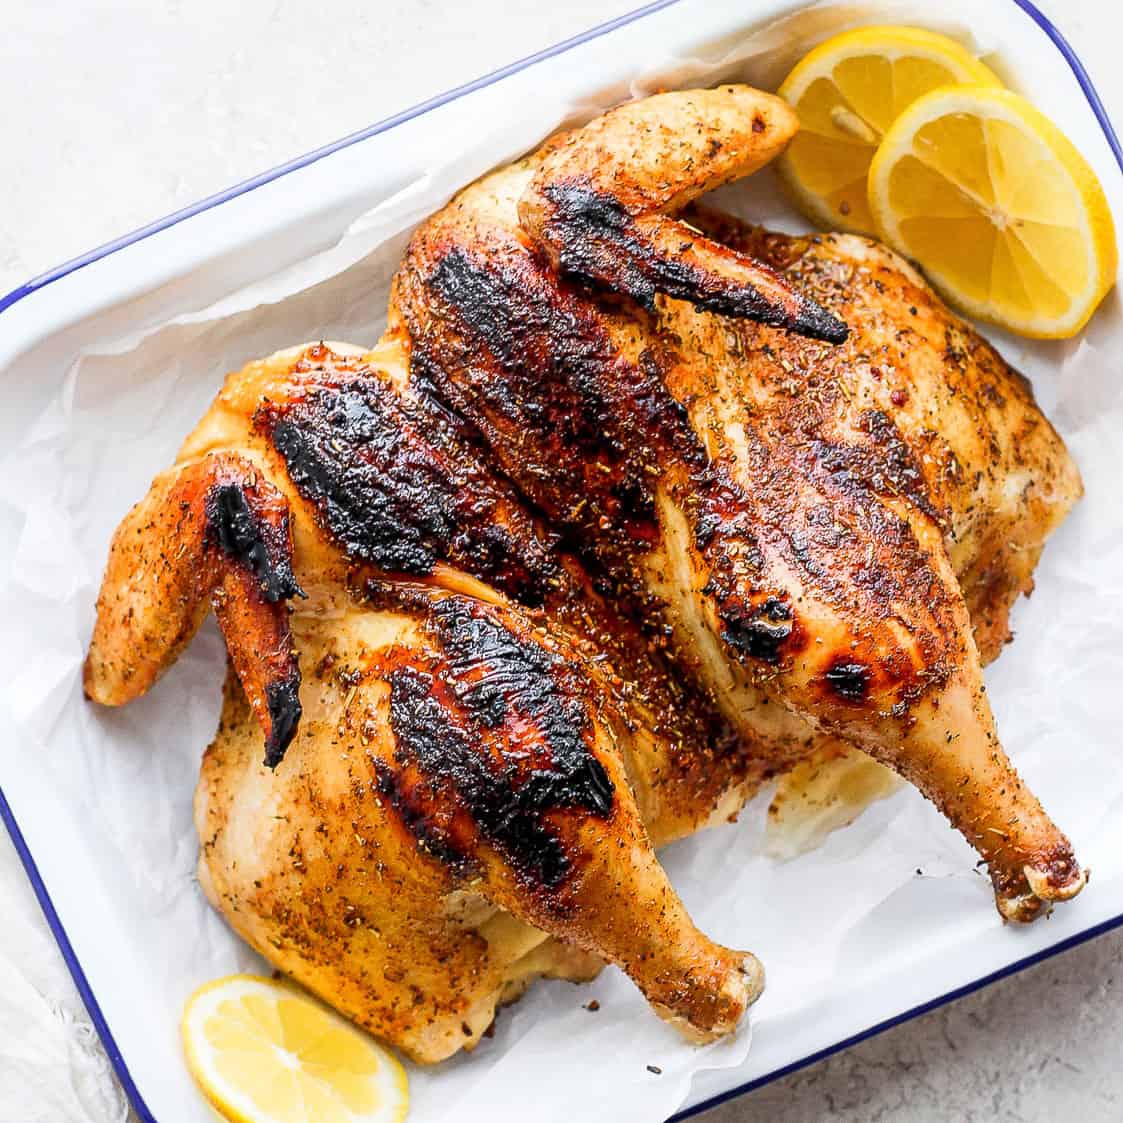 https://fitfoodiefinds.com/wp-content/uploads/2022/03/Grilled-Whole-Chicken-04sq.jpg